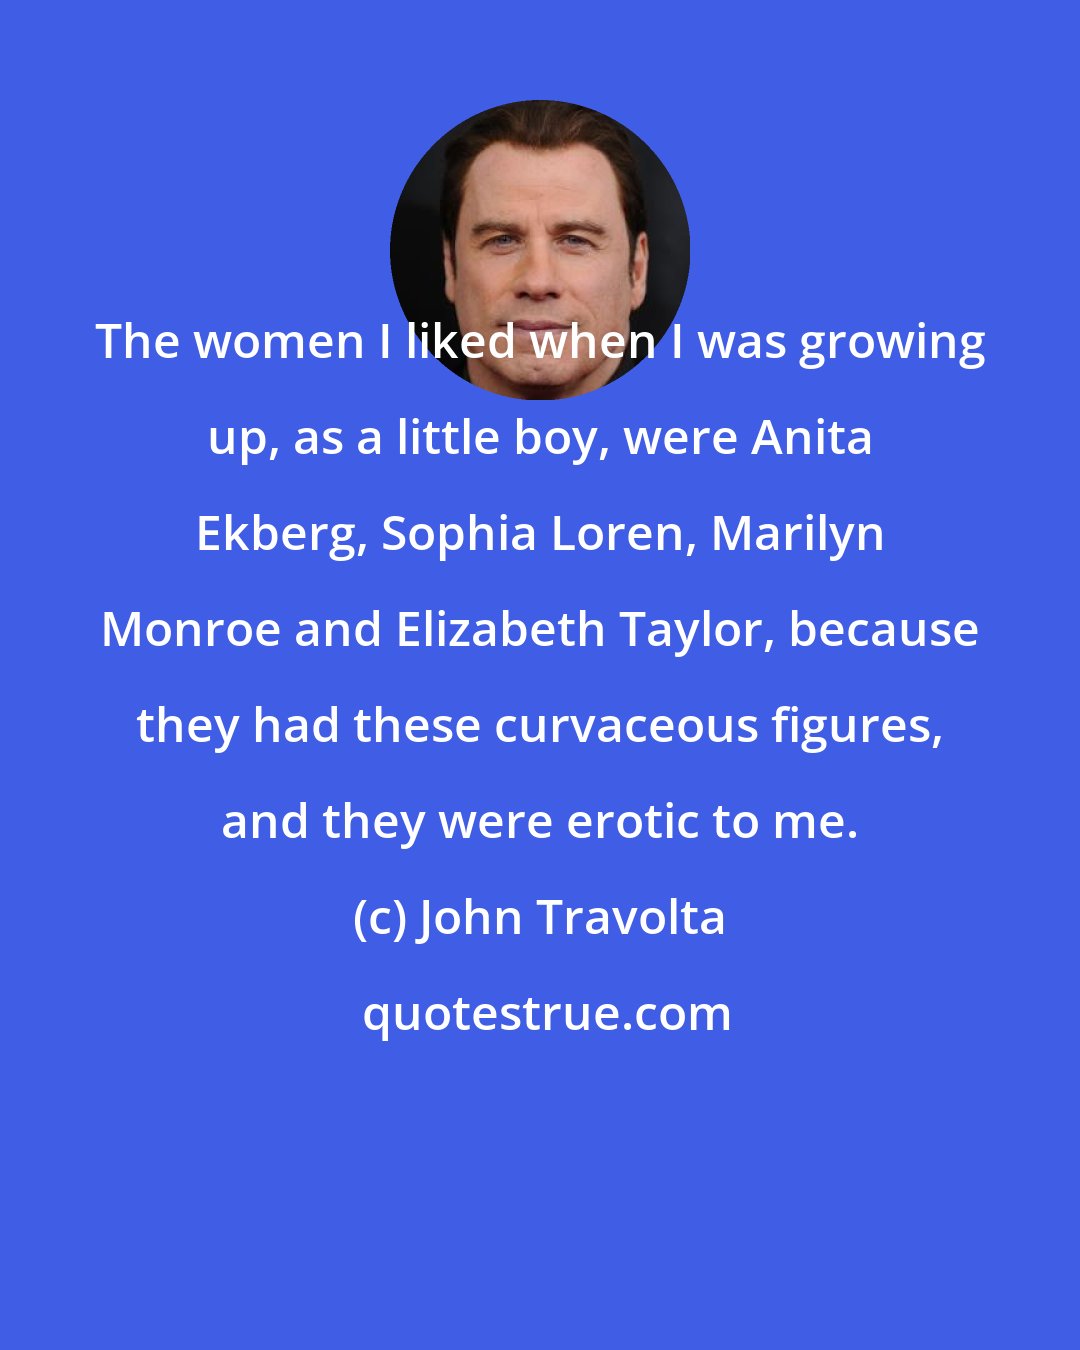 John Travolta: The women I liked when I was growing up, as a little boy, were Anita Ekberg, Sophia Loren, Marilyn Monroe and Elizabeth Taylor, because they had these curvaceous figures, and they were erotic to me.